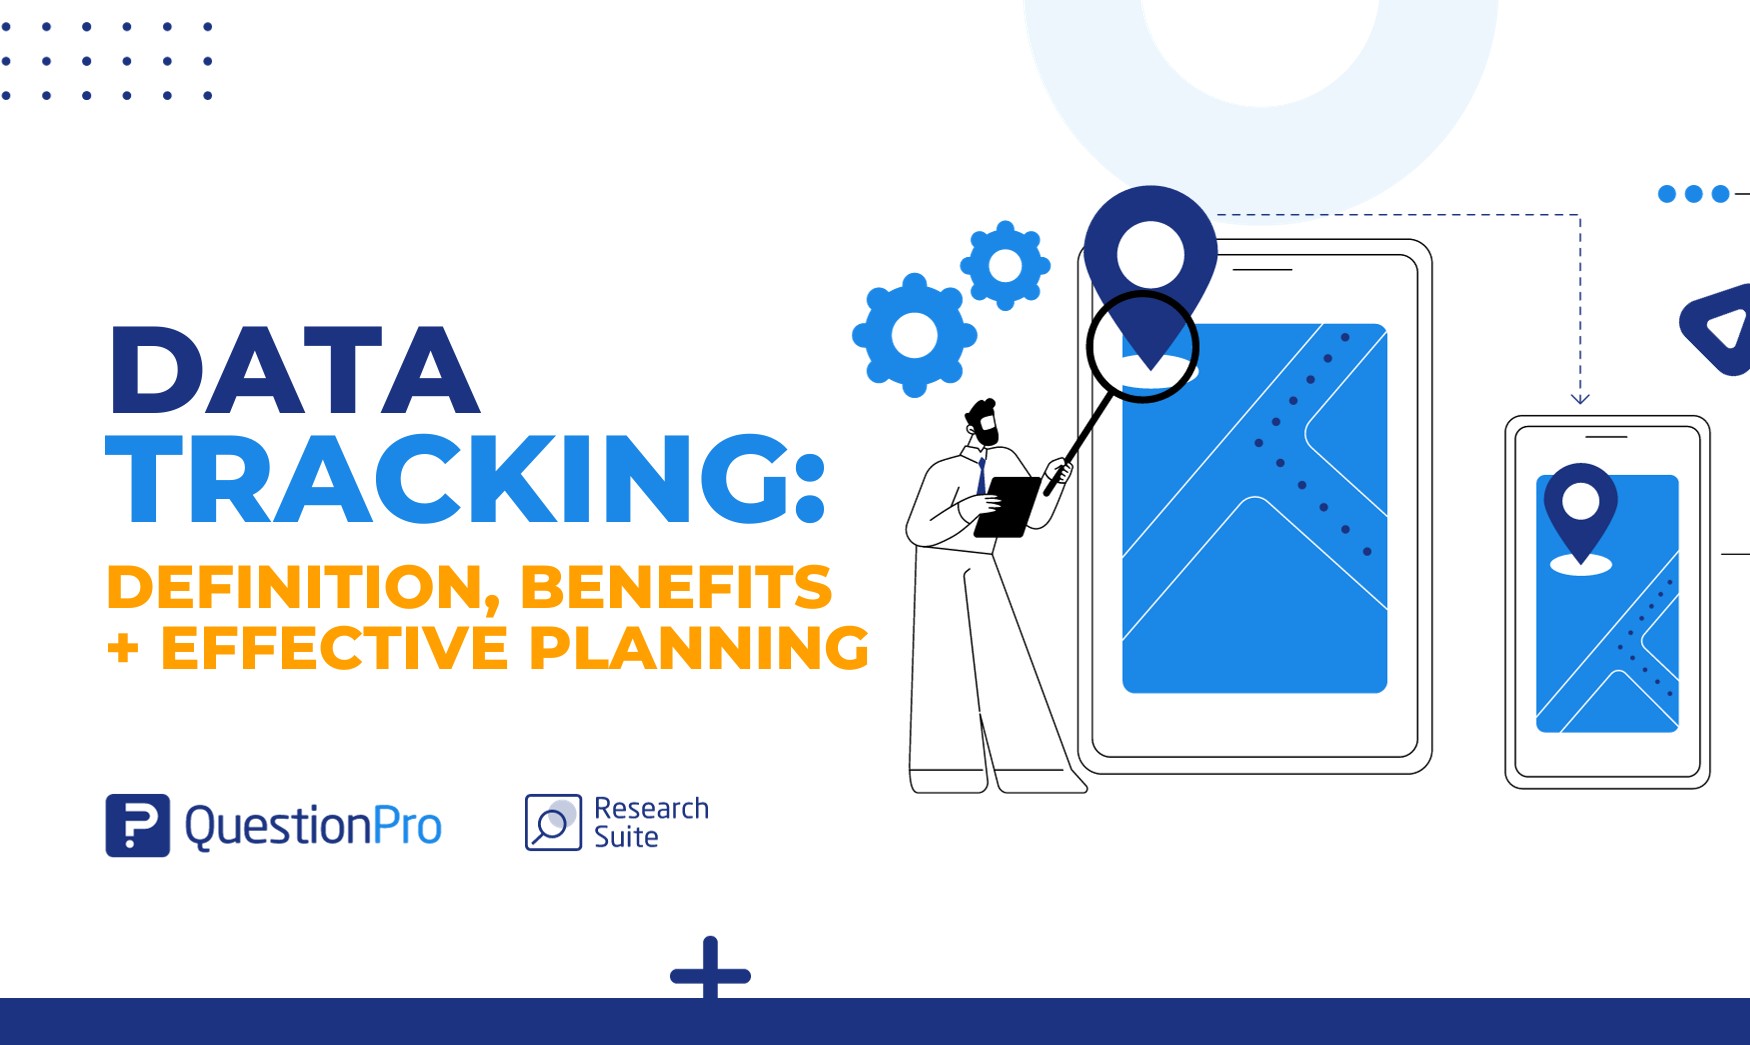 Data tracking includes monitoring and recording digital activities for analysis and insights. Explore its definition, benefits, and software.